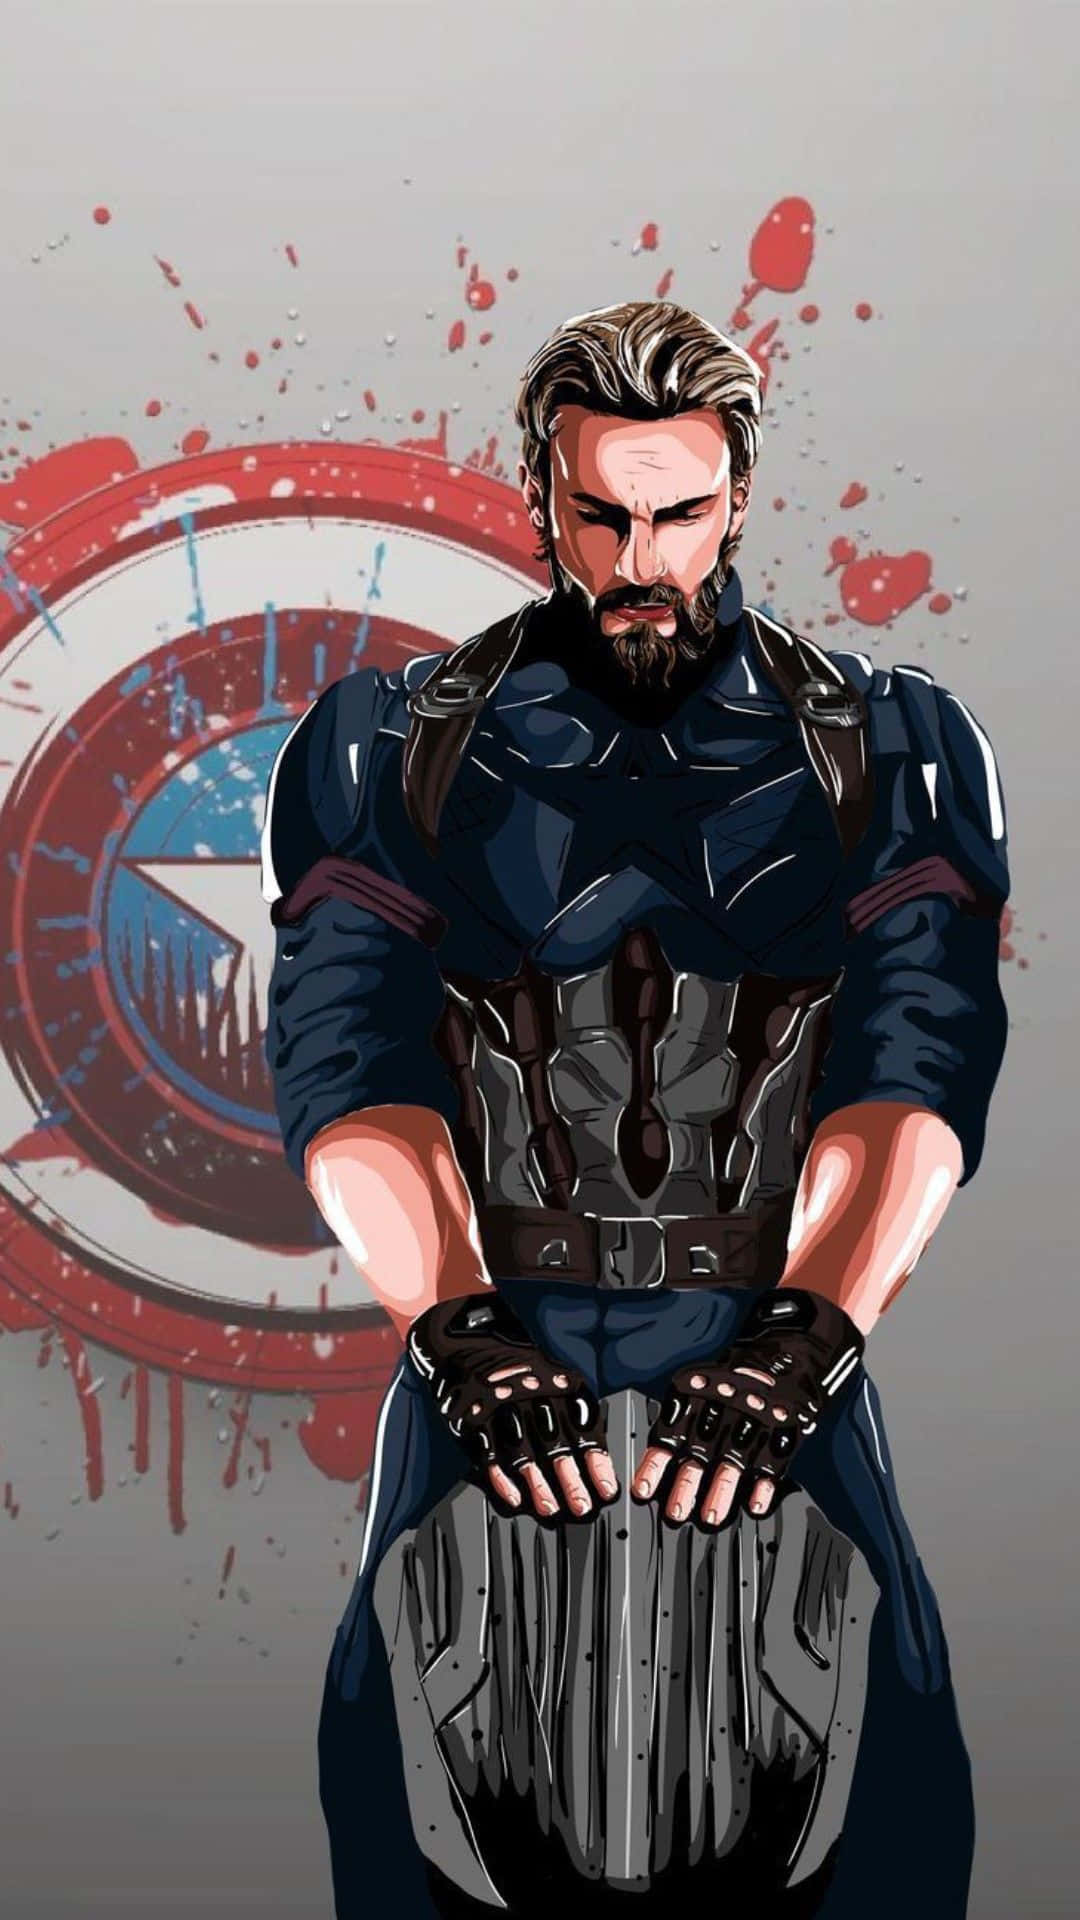 Android users everywhere, unite under the flag of Captain America